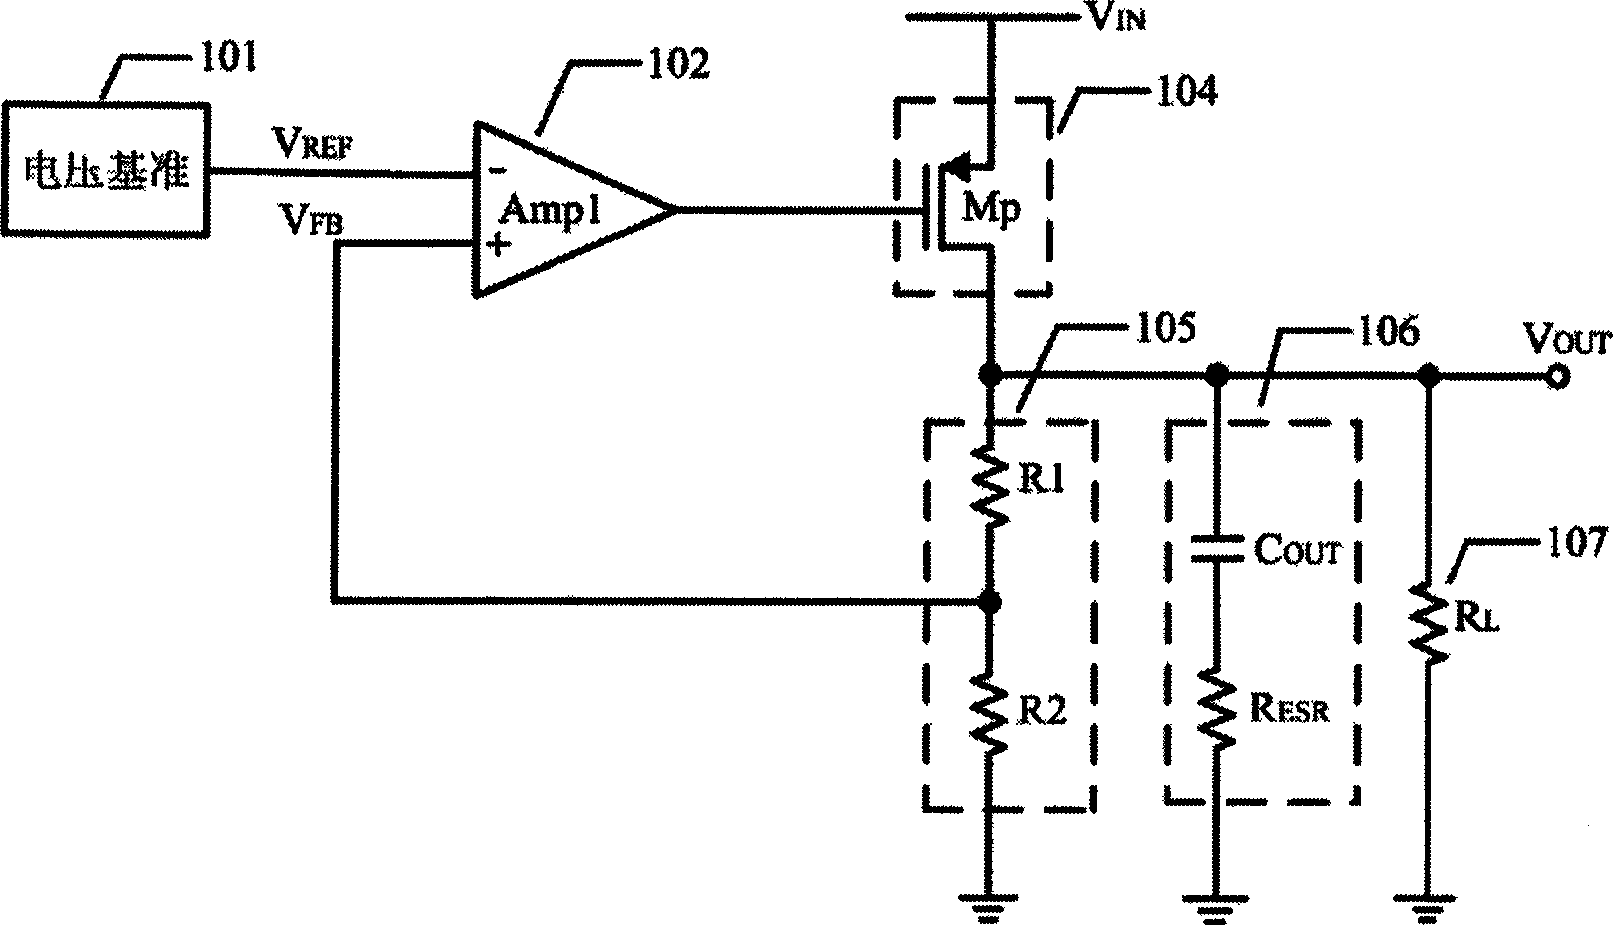 Low pressure difference linearity voltage stabilizer for enhancing performance by amplifier embedded compensation network